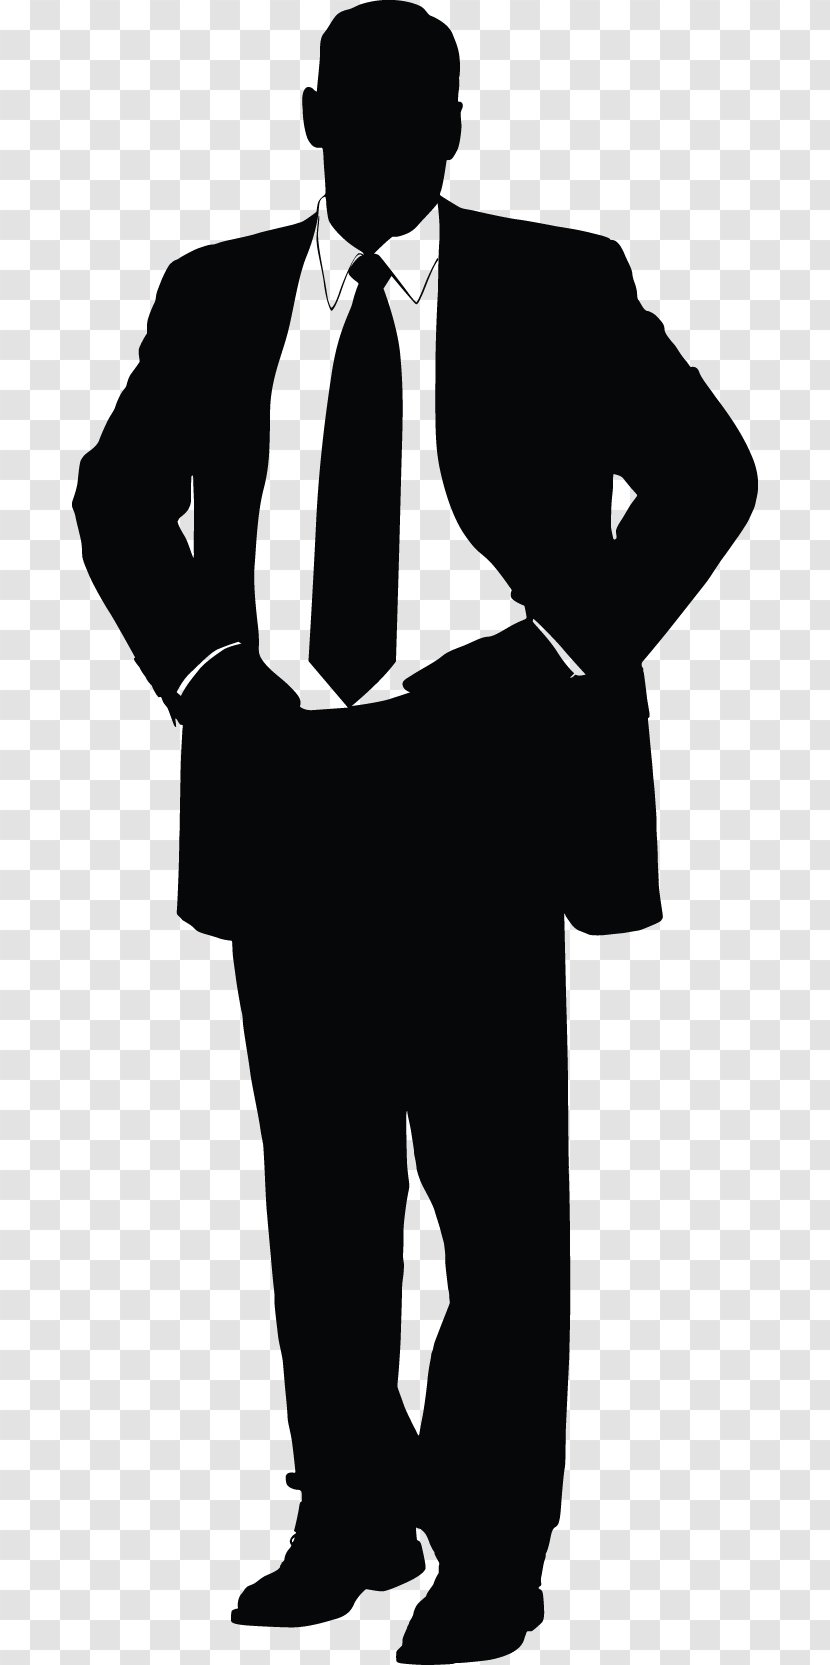 Businessperson Company Management Small Business - Black And White - Man Silhouette Transparent PNG